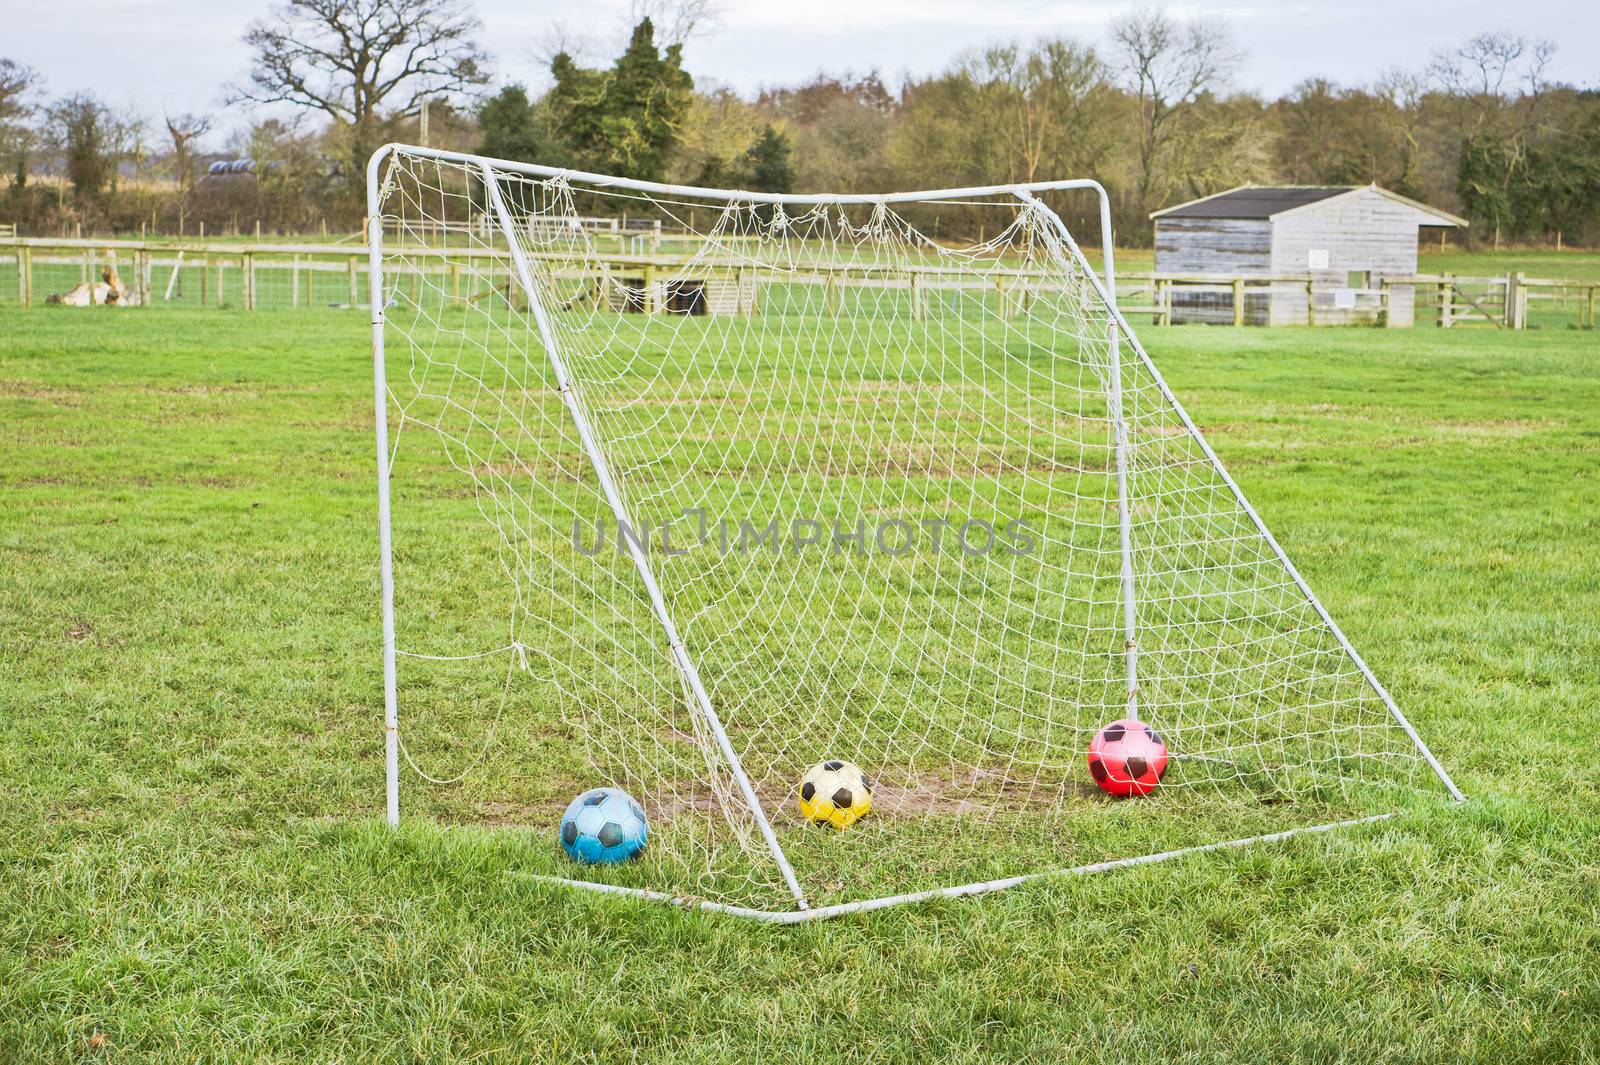 Football goal with colorful balls in it